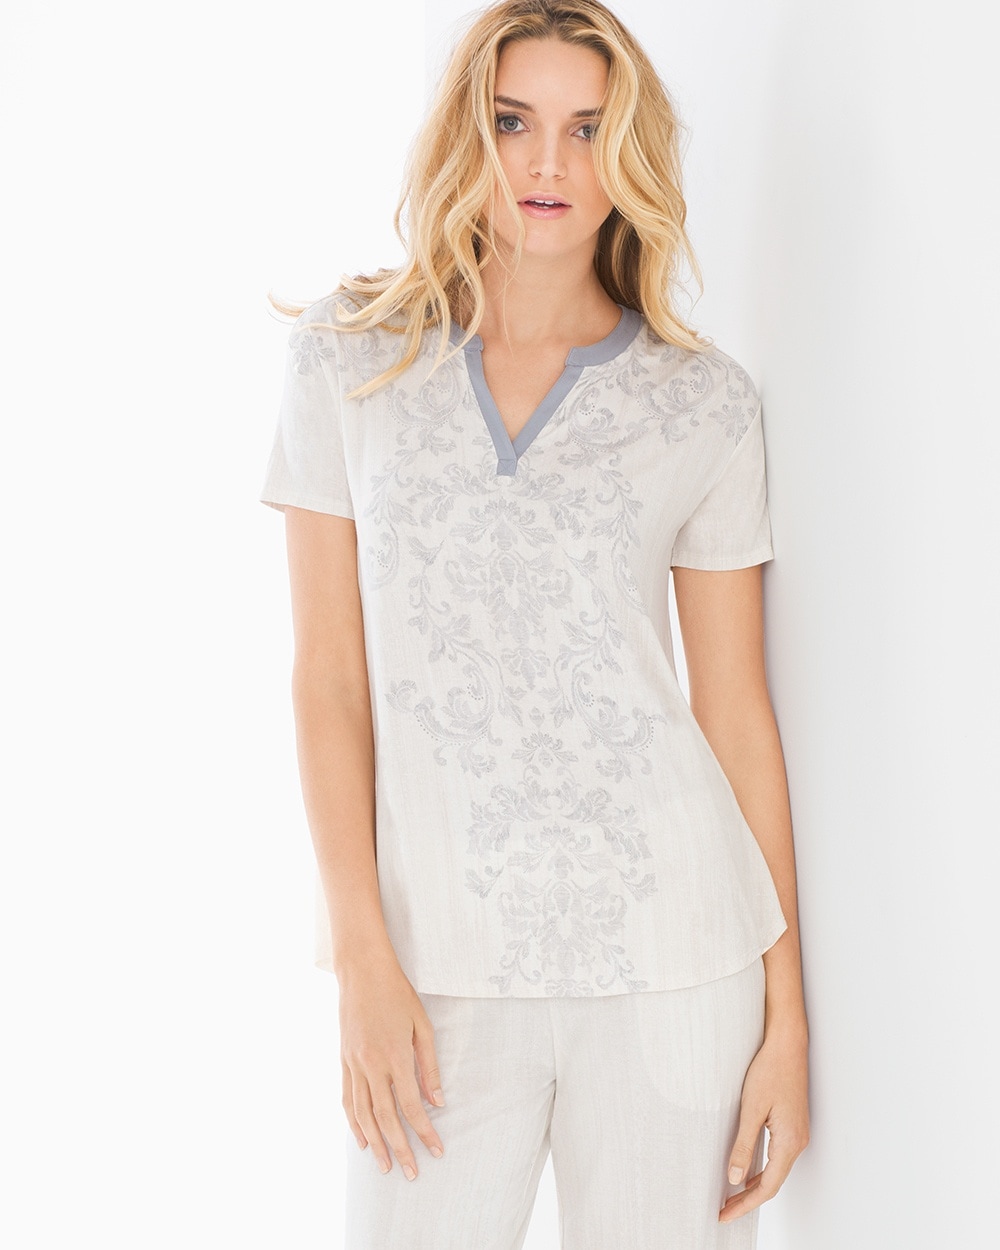 Cool Nights Pop Over Pajama Top Sublime Scroll Gray